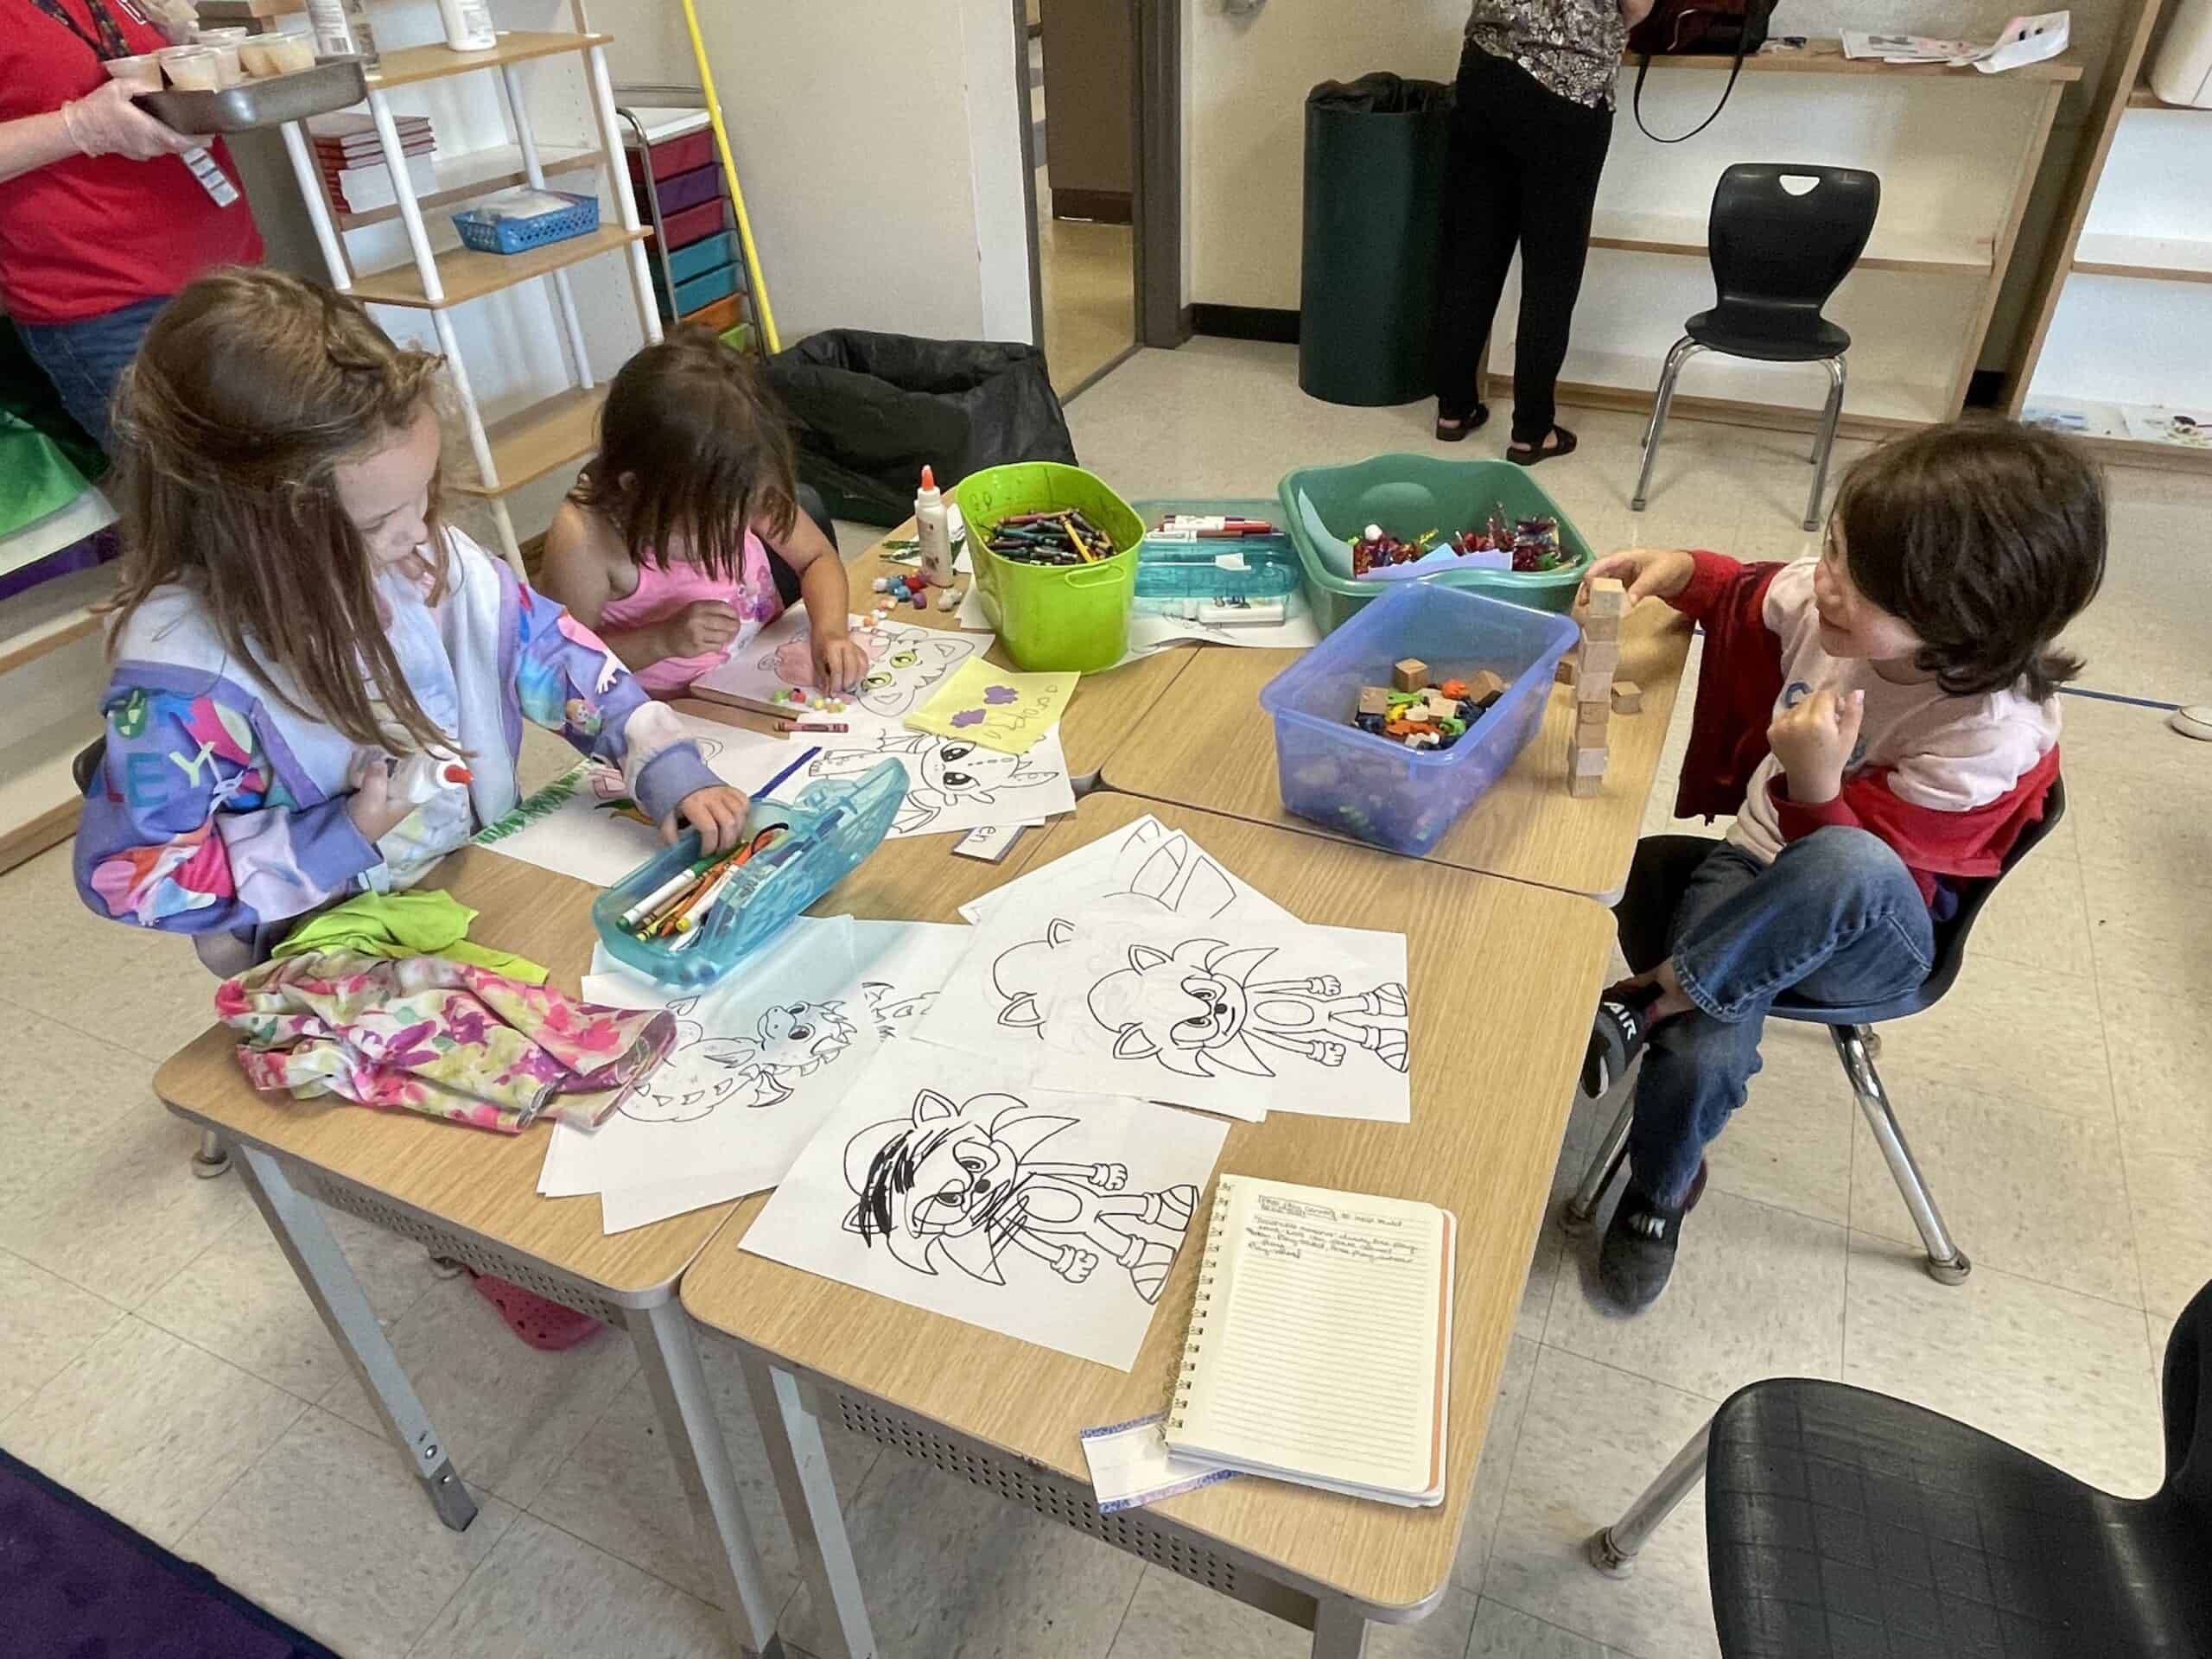 Three incoming kindergartners sit together at a table, covered with coloring pages. They are participaing in an activity together. One child is playing with what appears to be blocks, the other two children are coloring. 